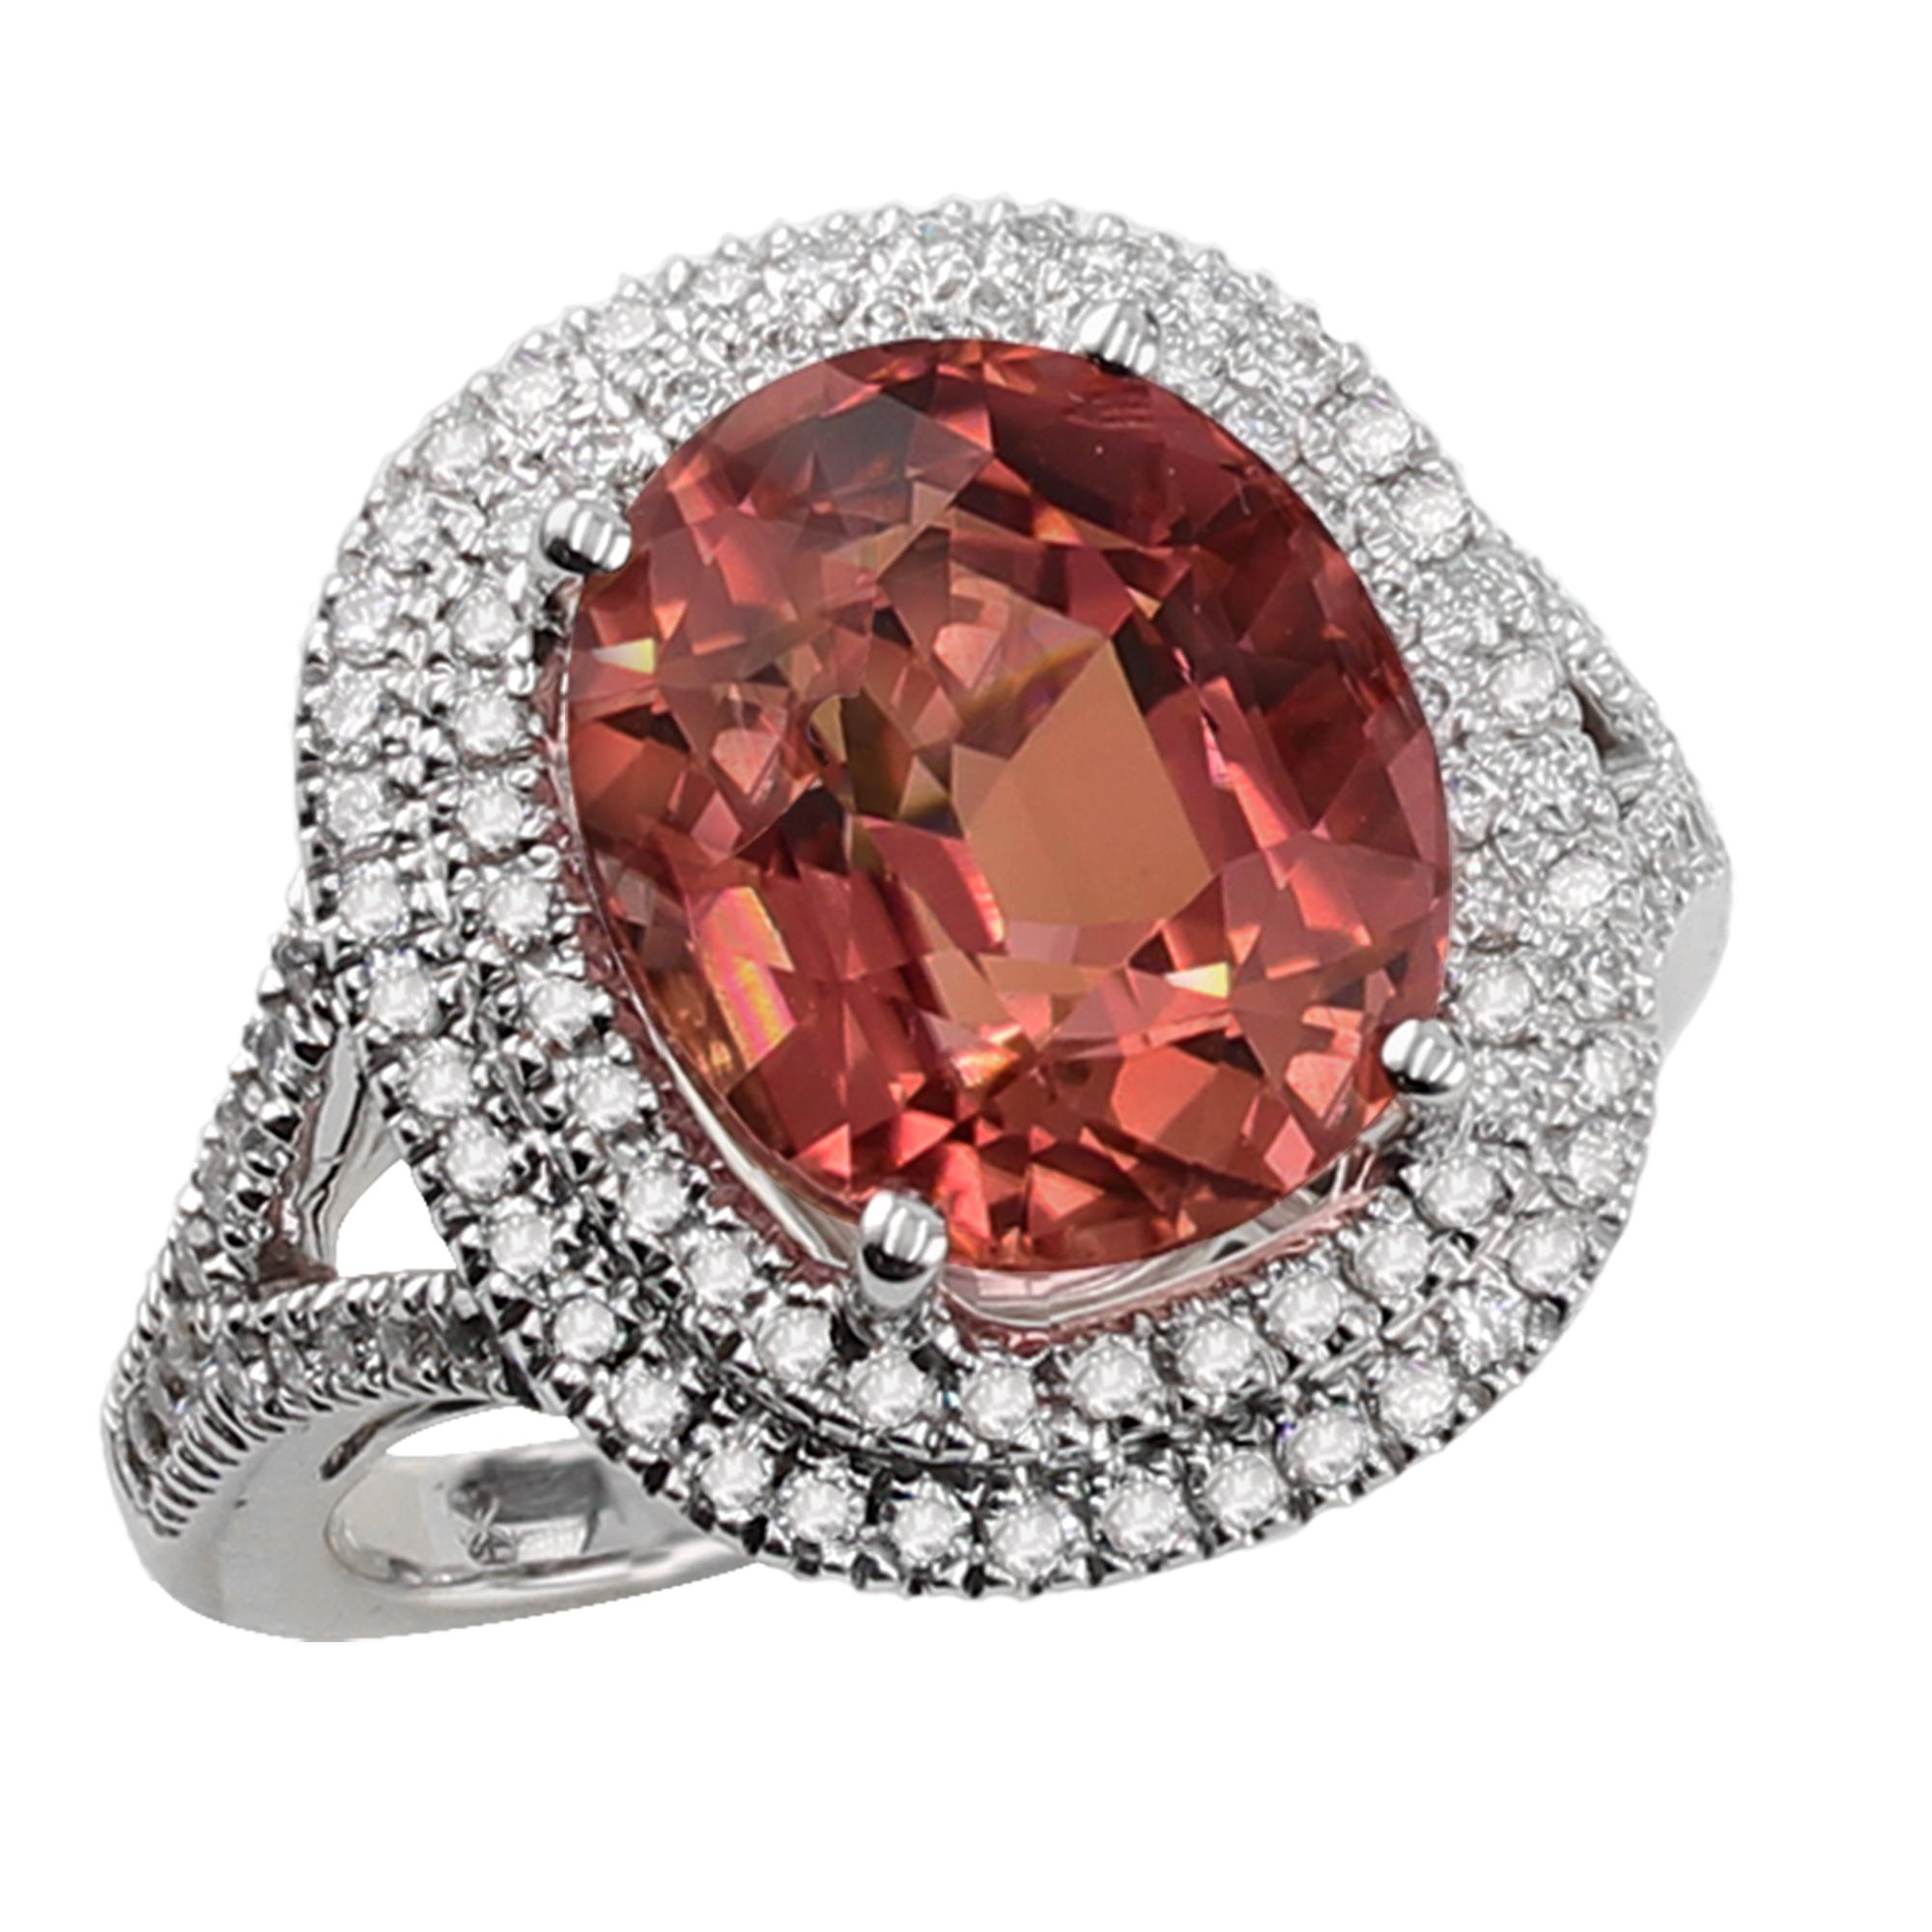 7.41 carat pretty-in-peach cushion tourmaline ring, set in 18K, split shank surrounded by a double halo of 0.63 carat diamonds. 

Pink and Peach tourmaline are said to carry healing energies and spiritual wisdom based on compassion, the heart and